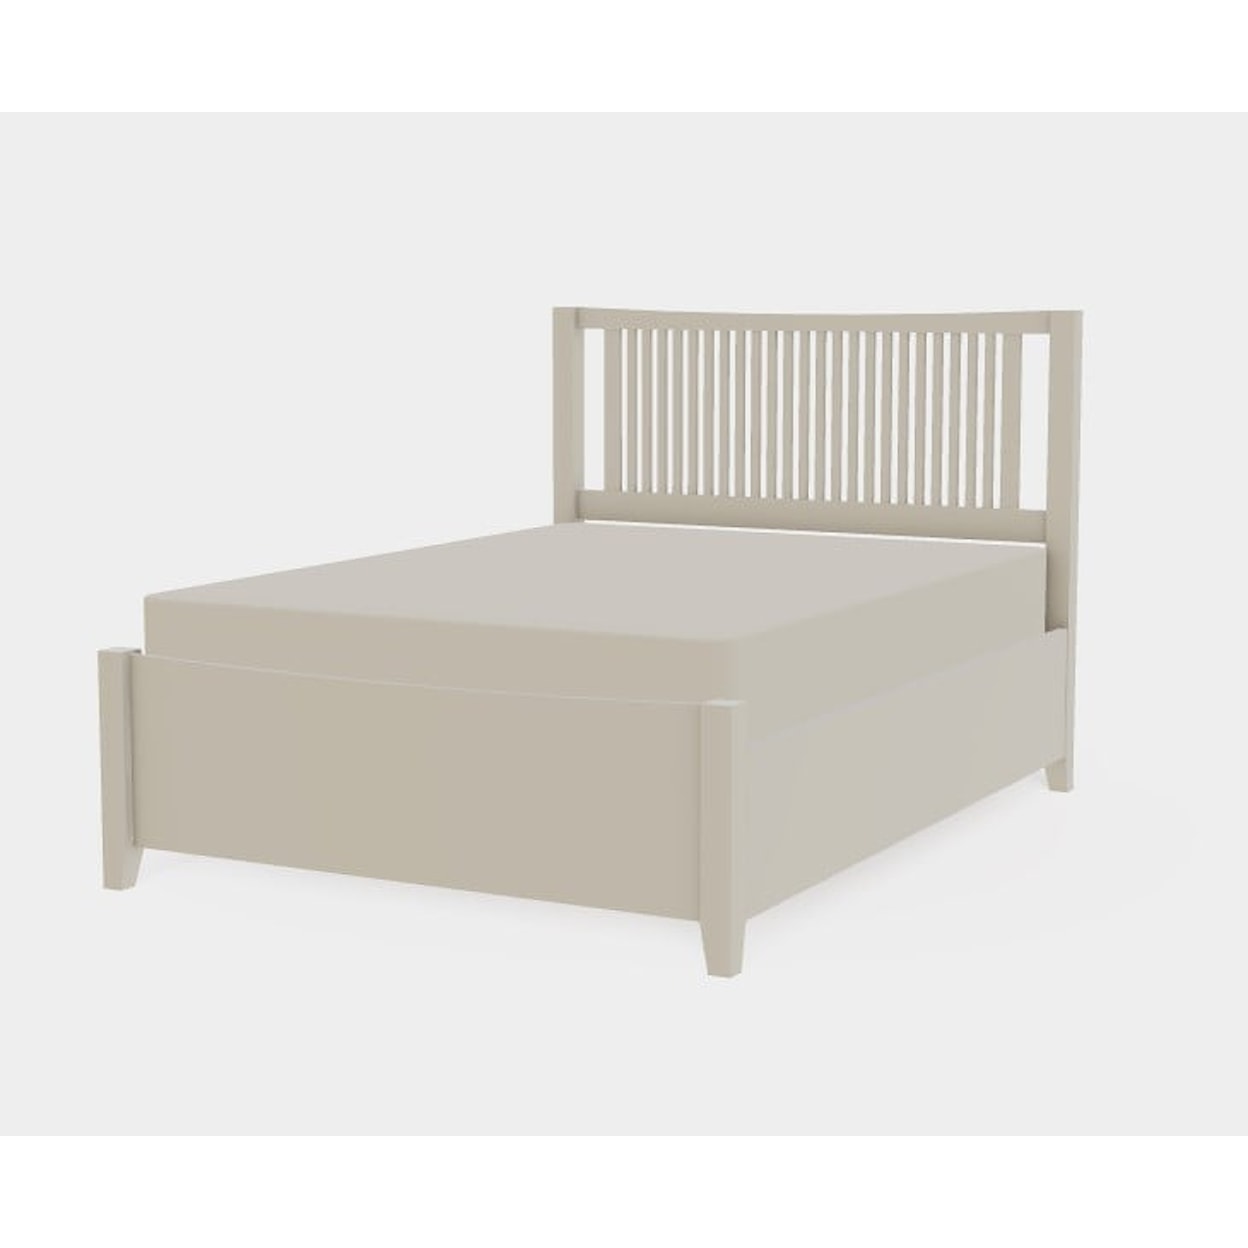 Mavin Atwood Group Atwood Queen Left Drawerside Spindle Bed